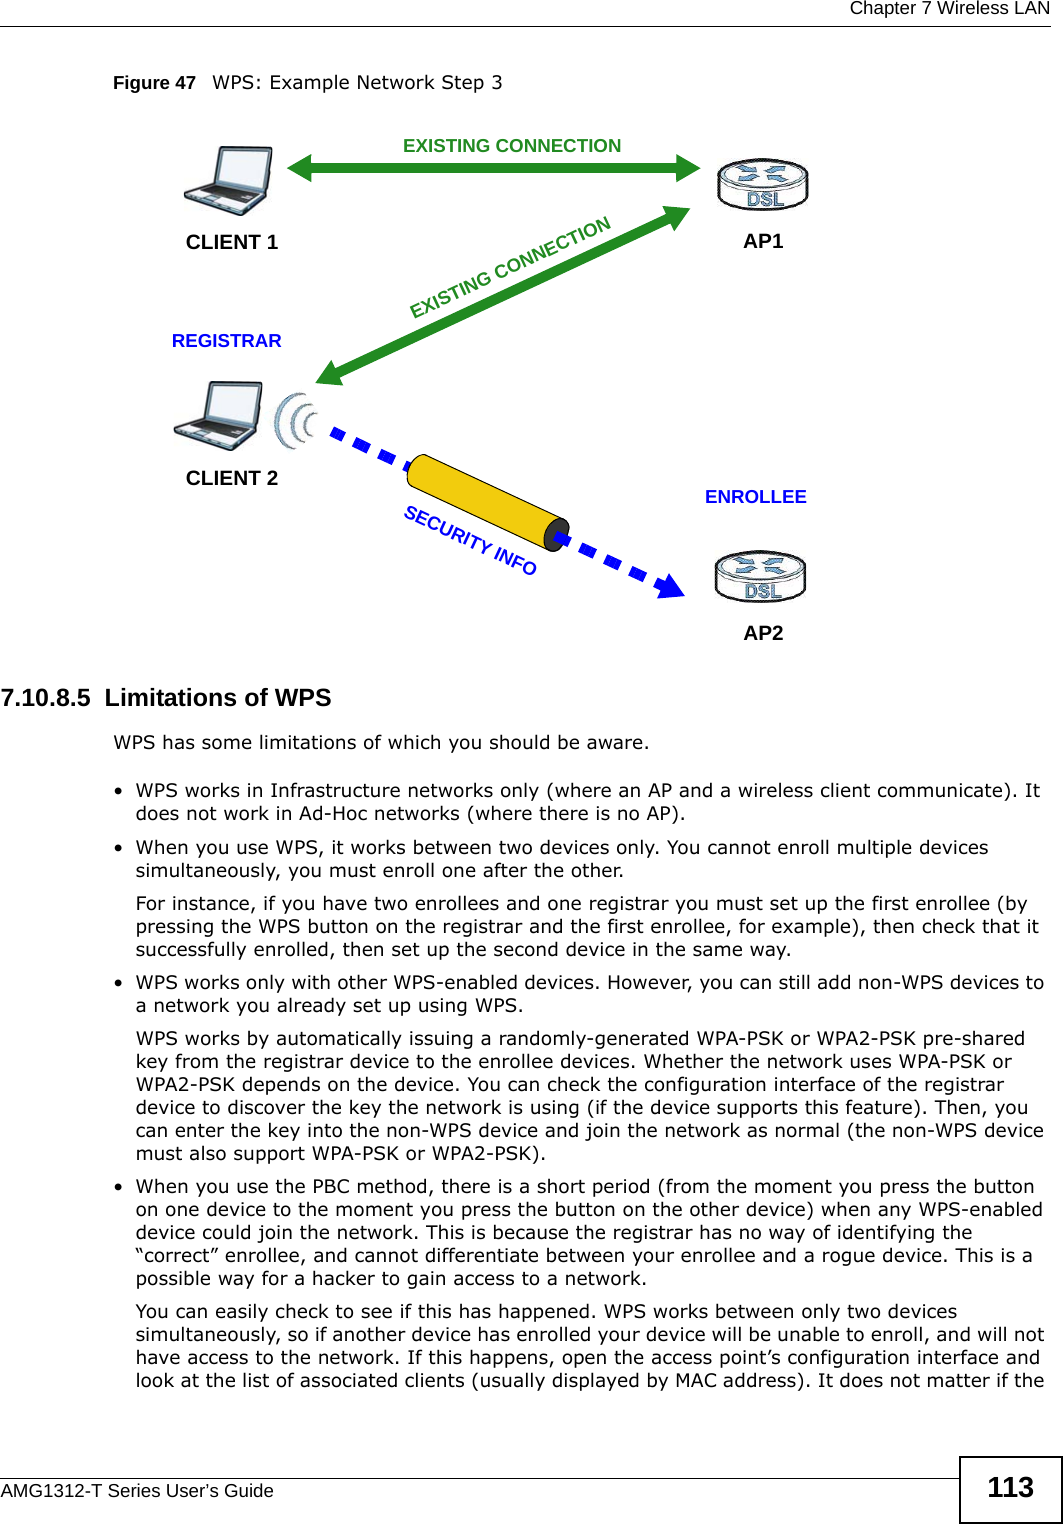  Chapter 7 Wireless LANAMG1312-T Series User’s Guide 113Figure 47   WPS: Example Network Step 37.10.8.5  Limitations of WPSWPS has some limitations of which you should be aware. • WPS works in Infrastructure networks only (where an AP and a wireless client communicate). It does not work in Ad-Hoc networks (where there is no AP).• When you use WPS, it works between two devices only. You cannot enroll multiple devices simultaneously, you must enroll one after the other. For instance, if you have two enrollees and one registrar you must set up the first enrollee (by pressing the WPS button on the registrar and the first enrollee, for example), then check that it successfully enrolled, then set up the second device in the same way.• WPS works only with other WPS-enabled devices. However, you can still add non-WPS devices to a network you already set up using WPS. WPS works by automatically issuing a randomly-generated WPA-PSK or WPA2-PSK pre-shared key from the registrar device to the enrollee devices. Whether the network uses WPA-PSK or WPA2-PSK depends on the device. You can check the configuration interface of the registrar device to discover the key the network is using (if the device supports this feature). Then, you can enter the key into the non-WPS device and join the network as normal (the non-WPS device must also support WPA-PSK or WPA2-PSK).• When you use the PBC method, there is a short period (from the moment you press the button on one device to the moment you press the button on the other device) when any WPS-enabled device could join the network. This is because the registrar has no way of identifying the “correct” enrollee, and cannot differentiate between your enrollee and a rogue device. This is a possible way for a hacker to gain access to a network.You can easily check to see if this has happened. WPS works between only two devices simultaneously, so if another device has enrolled your device will be unable to enroll, and will not have access to the network. If this happens, open the access point’s configuration interface and look at the list of associated clients (usually displayed by MAC address). It does not matter if the CLIENT 1 AP1REGISTRARCLIENT 2EXISTING CONNECTIONSECURITY INFOENROLLEEAP2EXISTING CONNECTION